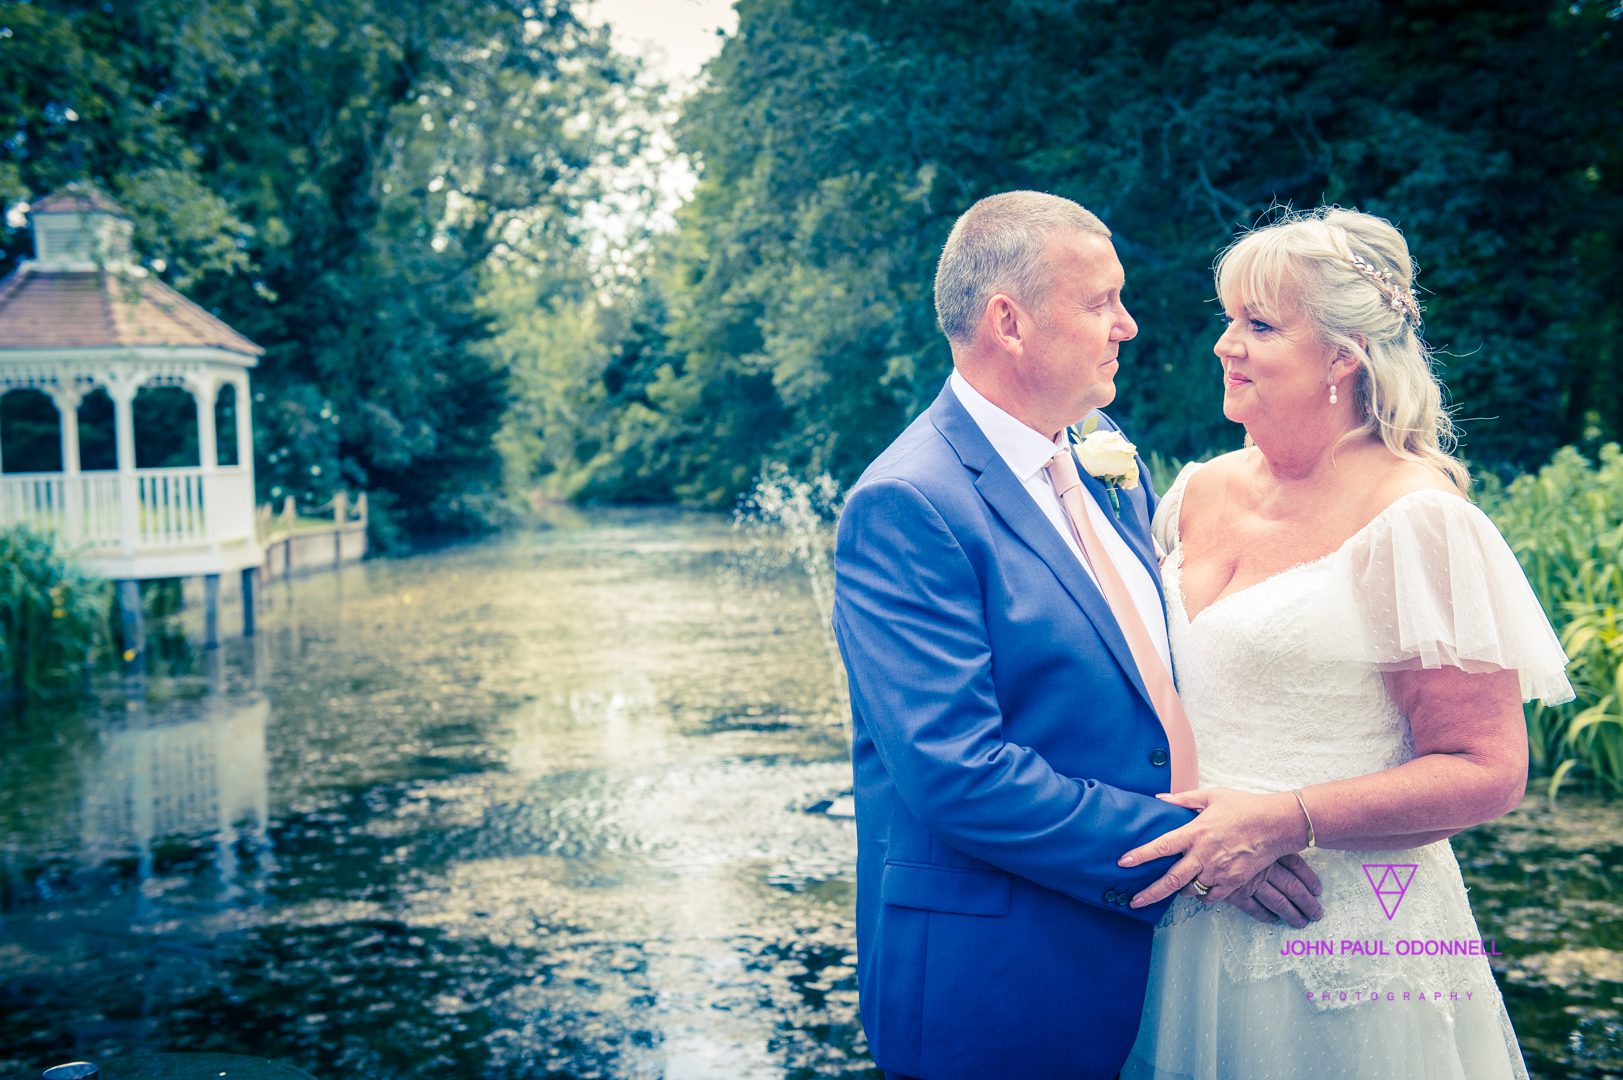 Sharon and Michaels wedding at Sheene Mill Royston